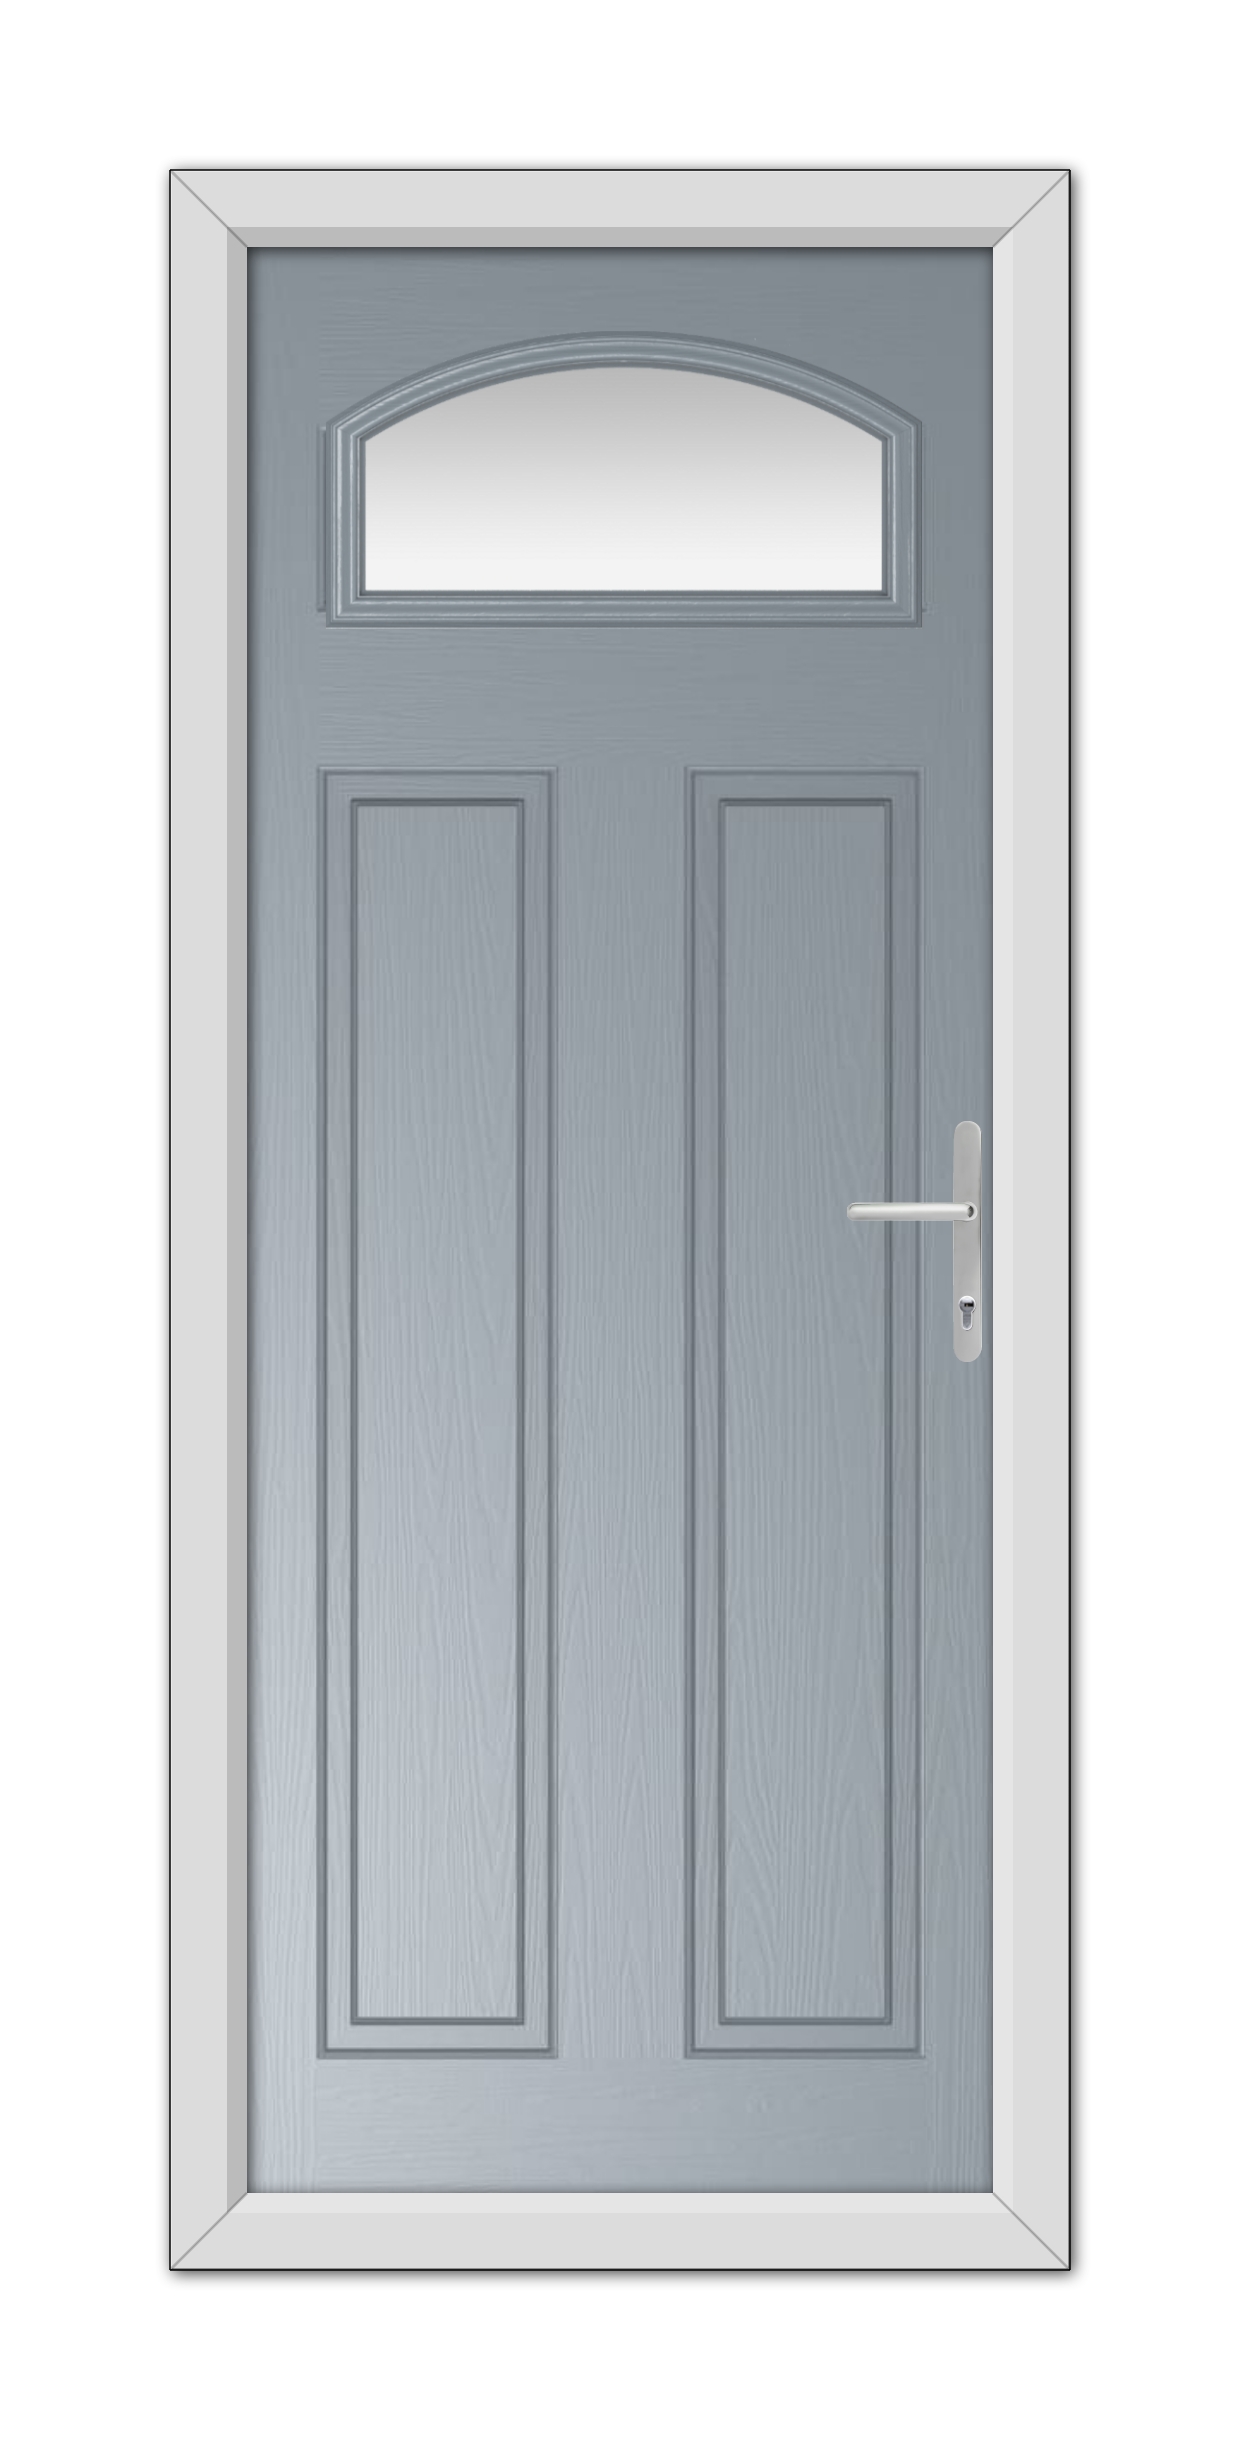 A modern French Grey Harlington Composite Door 48mm Timber Core with a white frame, featuring a semi-circular transom window and a metal handle on the right side.